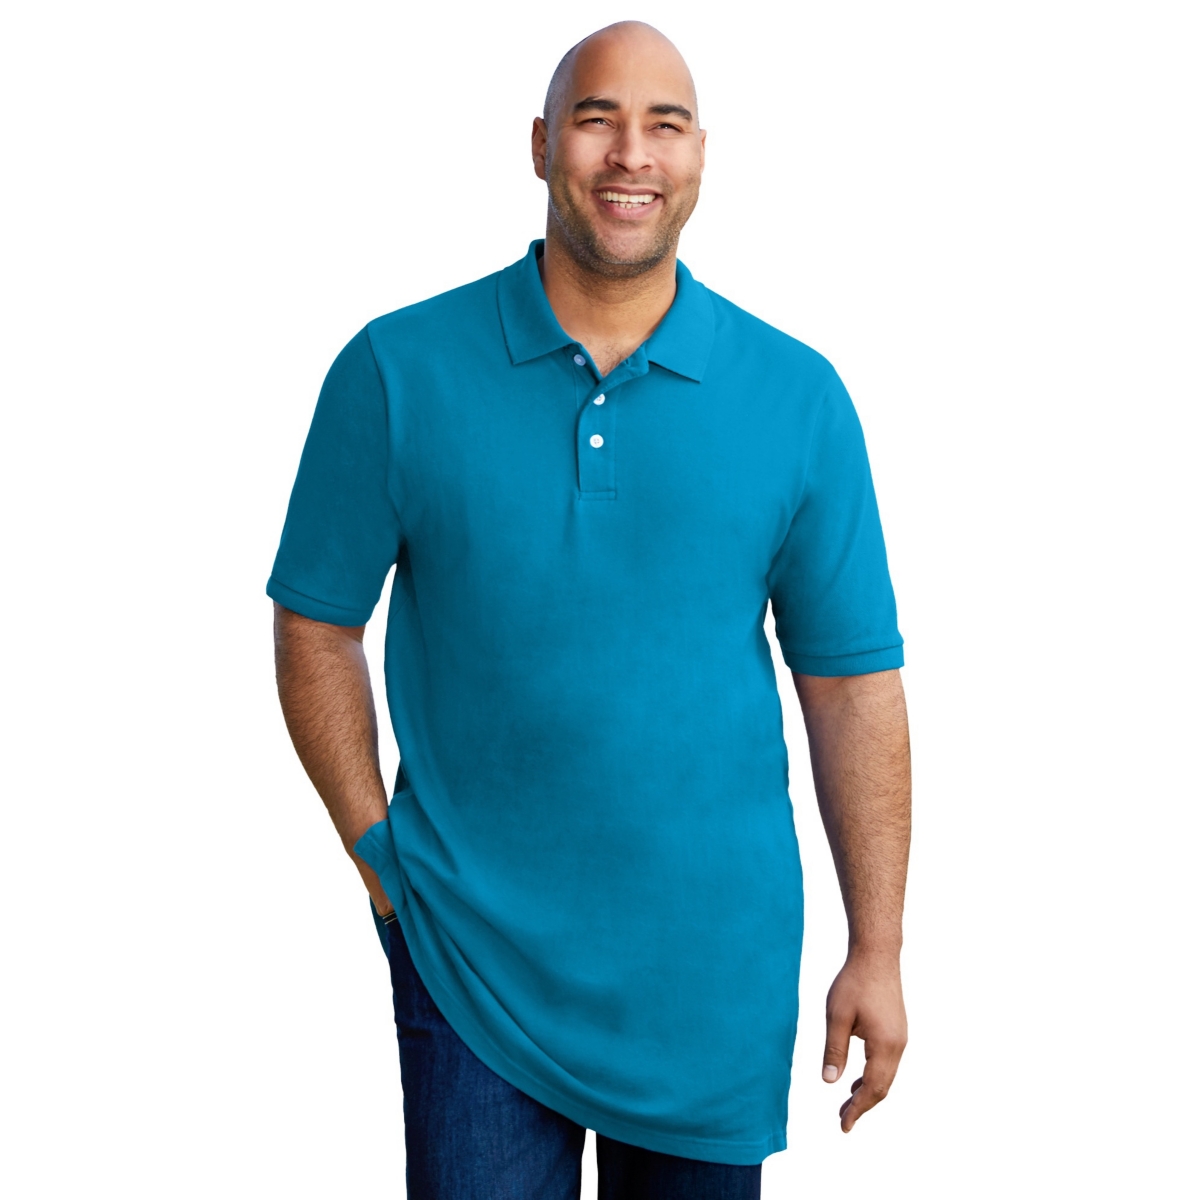 Big & Tall Longer-Length Shrink-Less Pique Polo Shirt - Electric turquoise